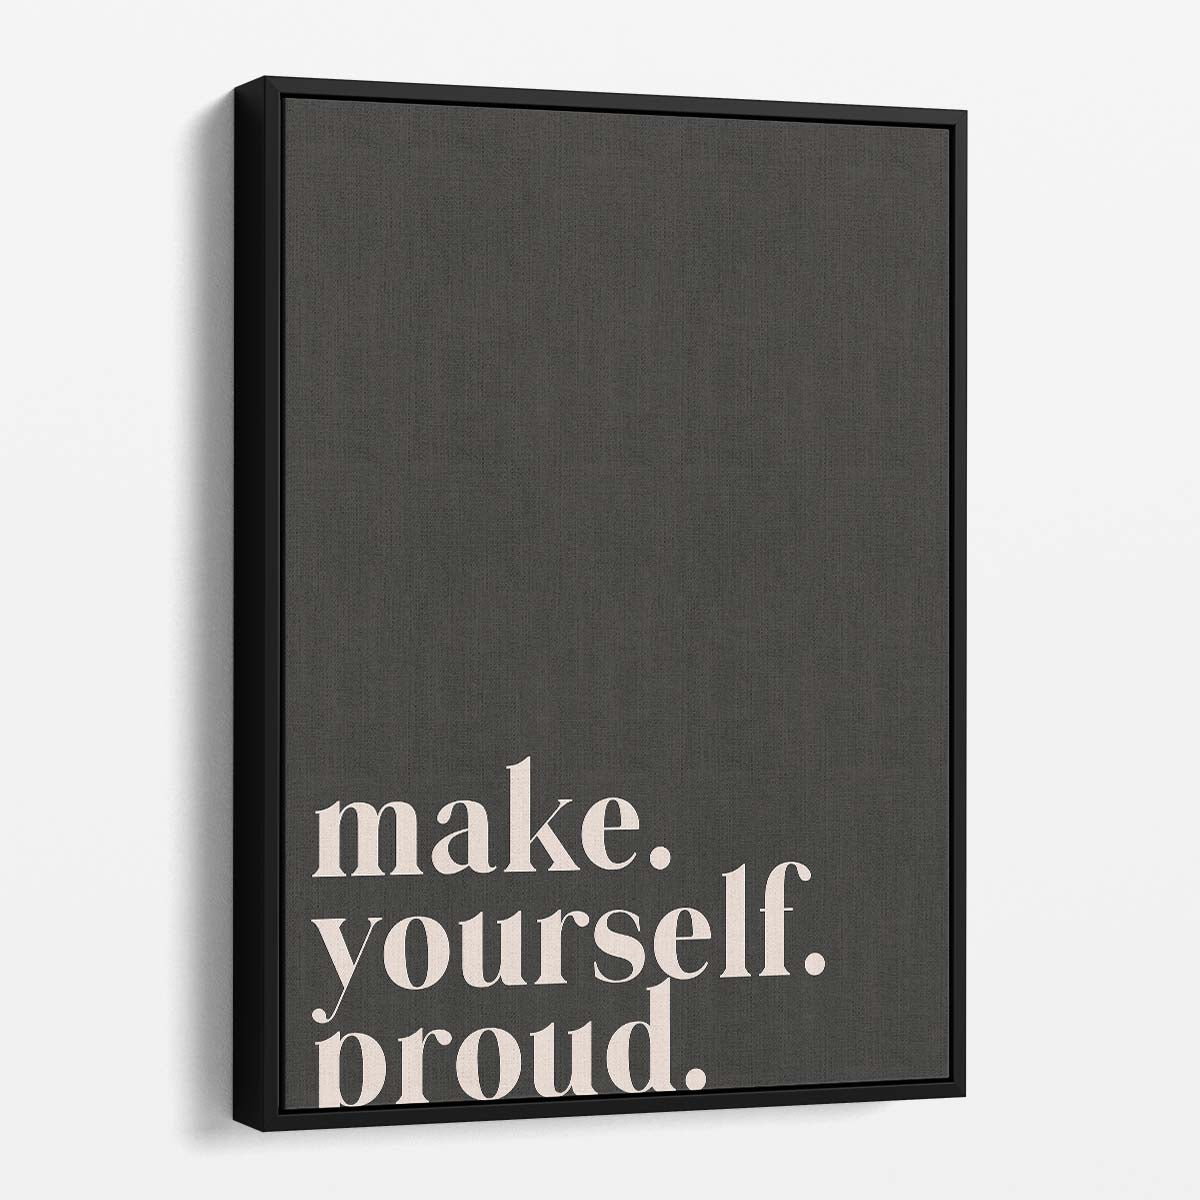 Beige Quote Illustration Wall Art 'Make Yourself Proud' by uplusmestudio by Luxuriance Designs, made in USA